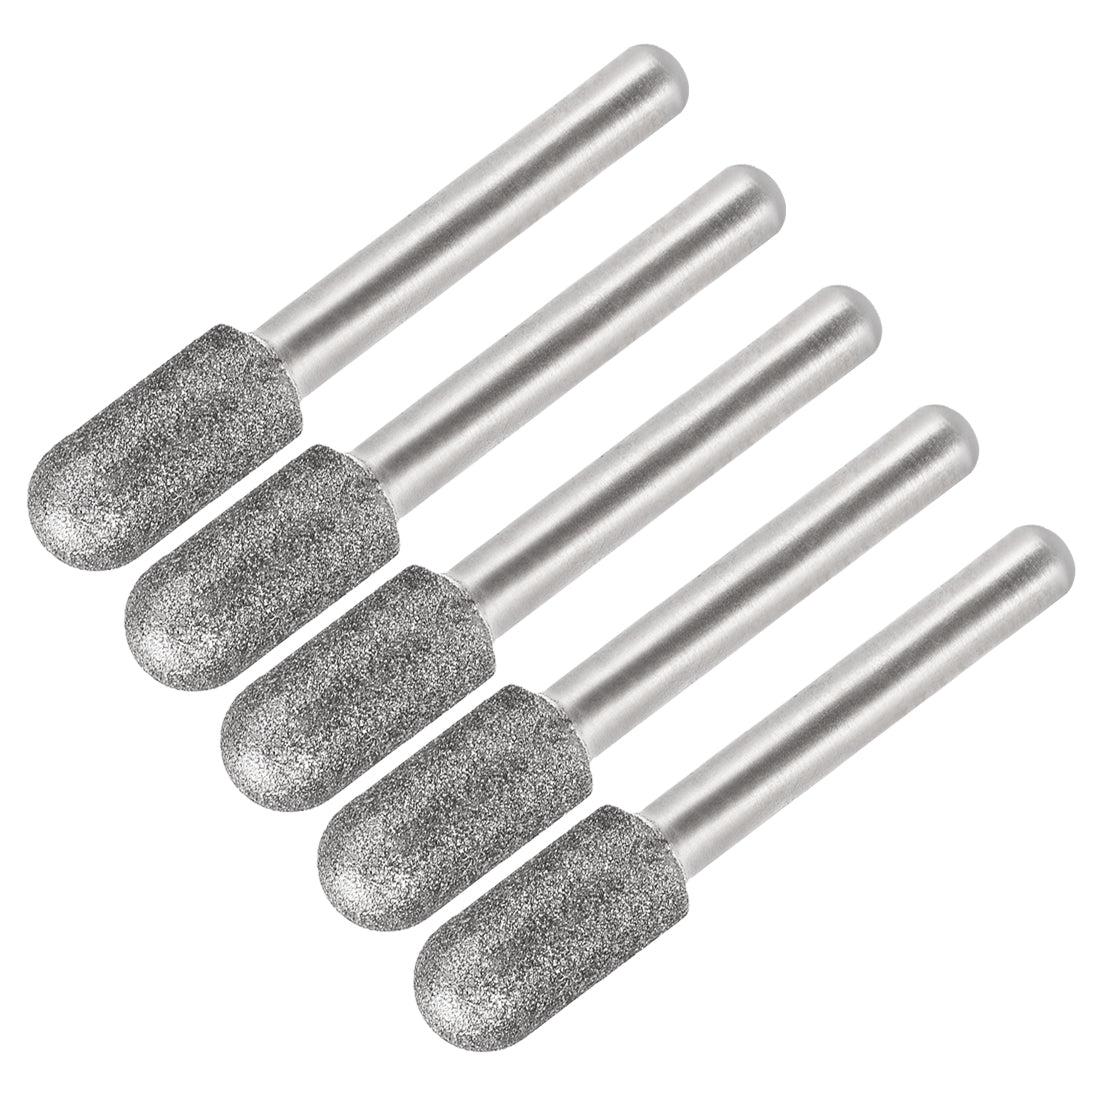 Uxcell Uxcell Diamond Burrs Grinding Drill Bits for Carving Rotary Tool 1/4-Inch Shank 10mm Cylindrical Ball Nose 150 Grit 5 Pcs